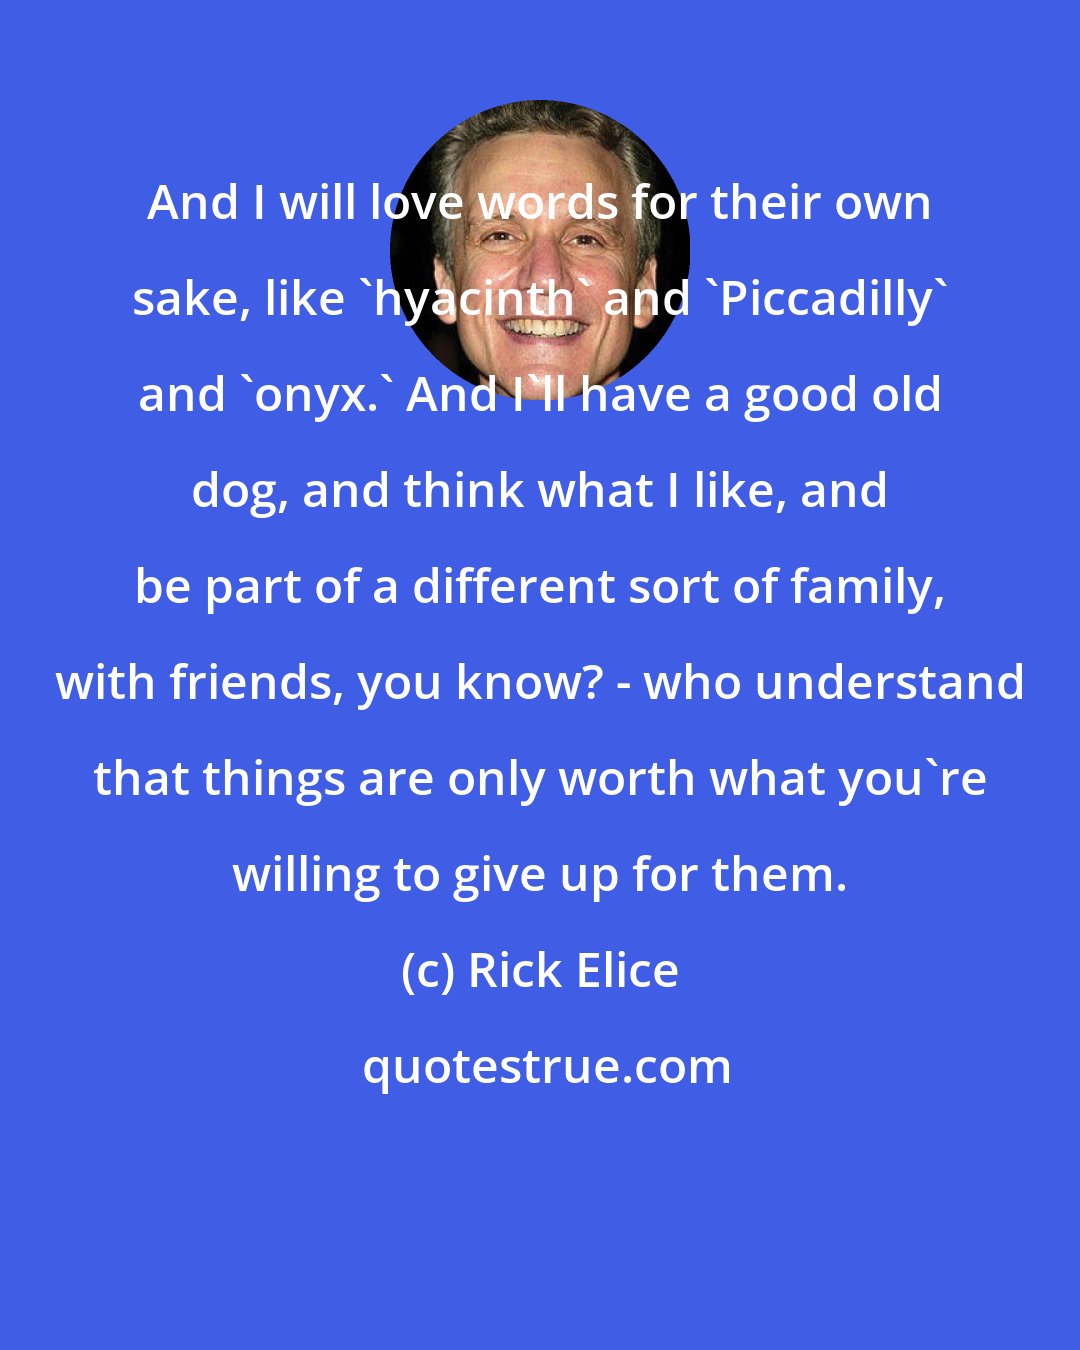 Rick Elice: And I will love words for their own sake, like 'hyacinth' and 'Piccadilly' and 'onyx.' And I'll have a good old dog, and think what I like, and be part of a different sort of family, with friends, you know? - who understand that things are only worth what you're willing to give up for them.